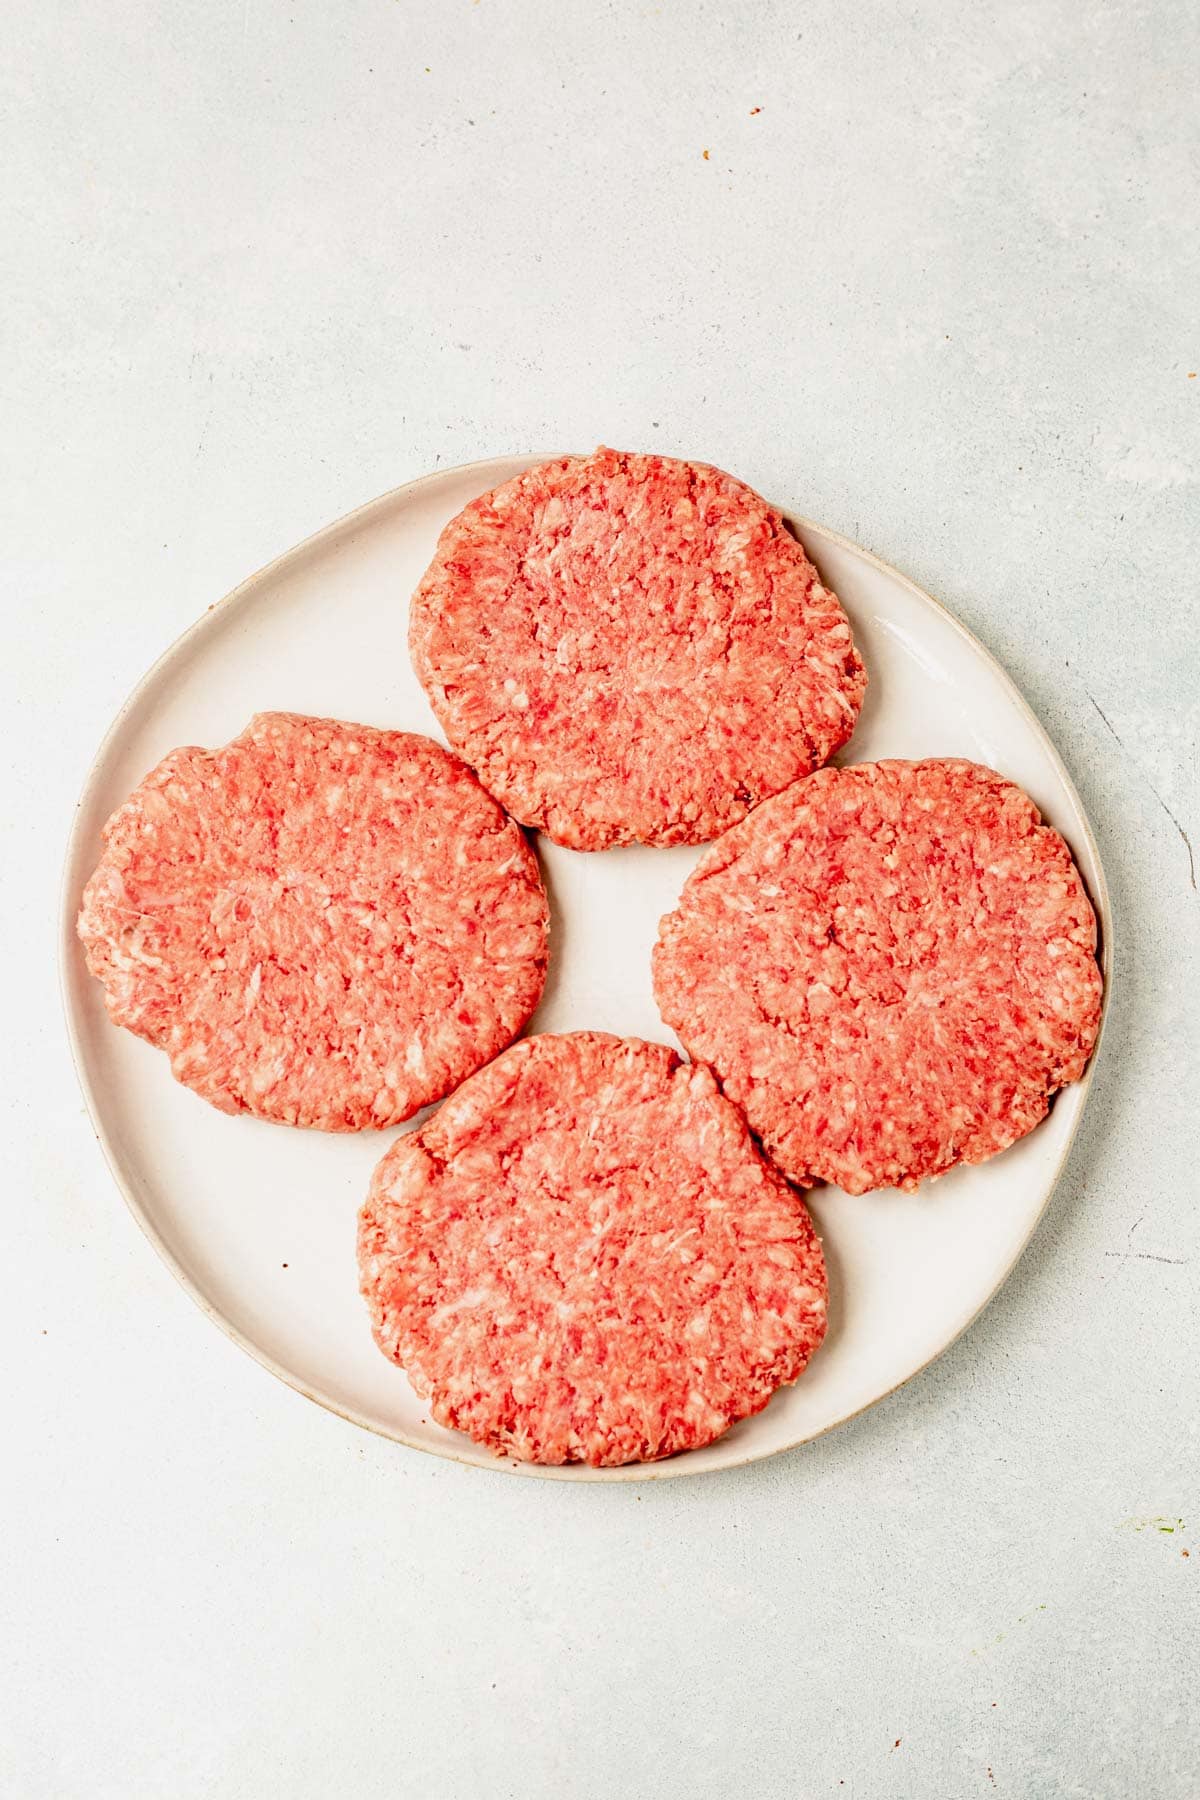 How Long Should You Grill Burgers? - Capo Fireside